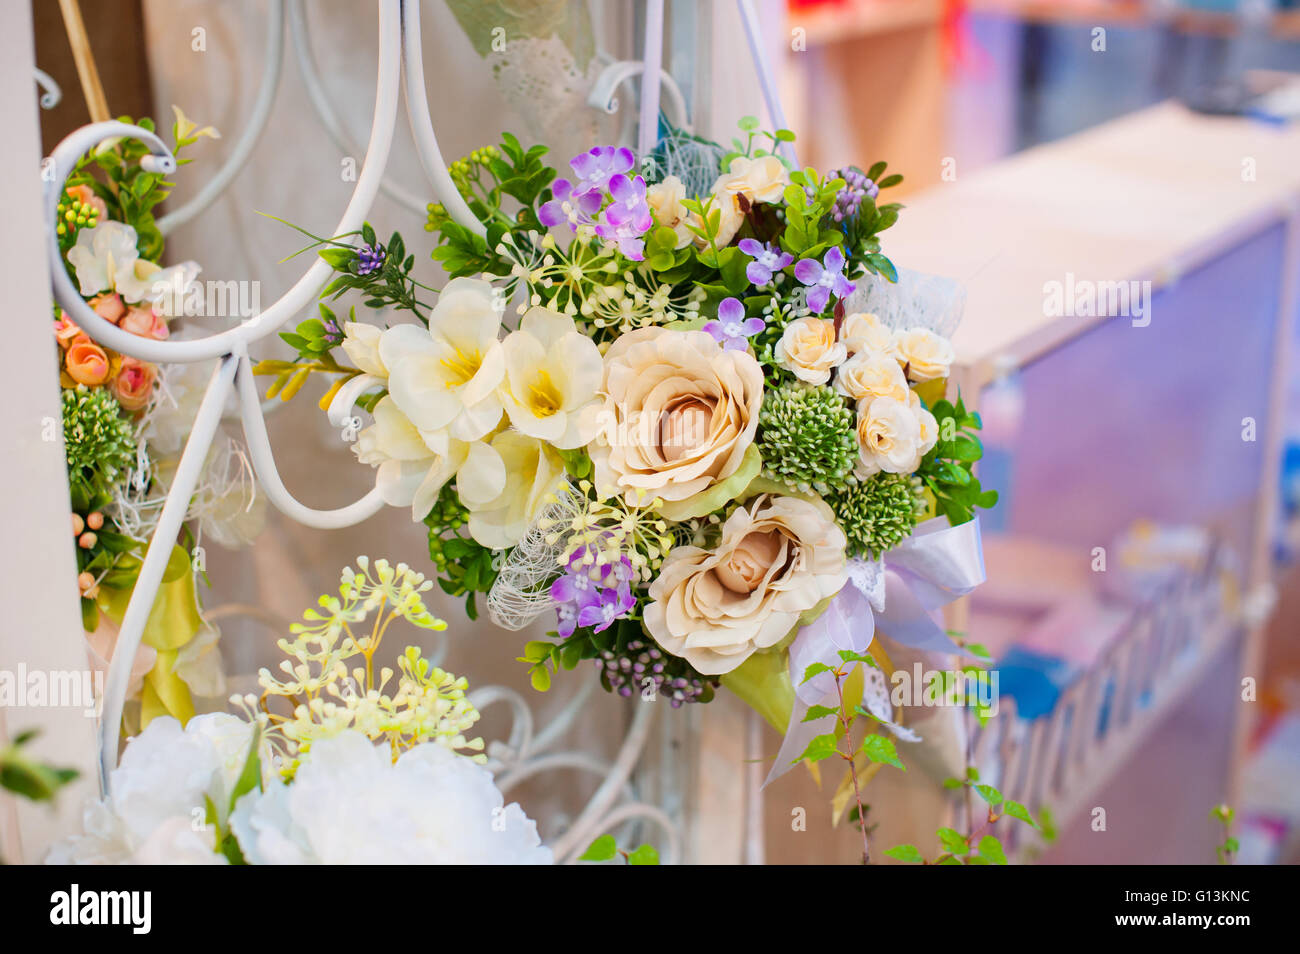 Wedding decoration of flowers for ceremony in restaurant Stock Photo